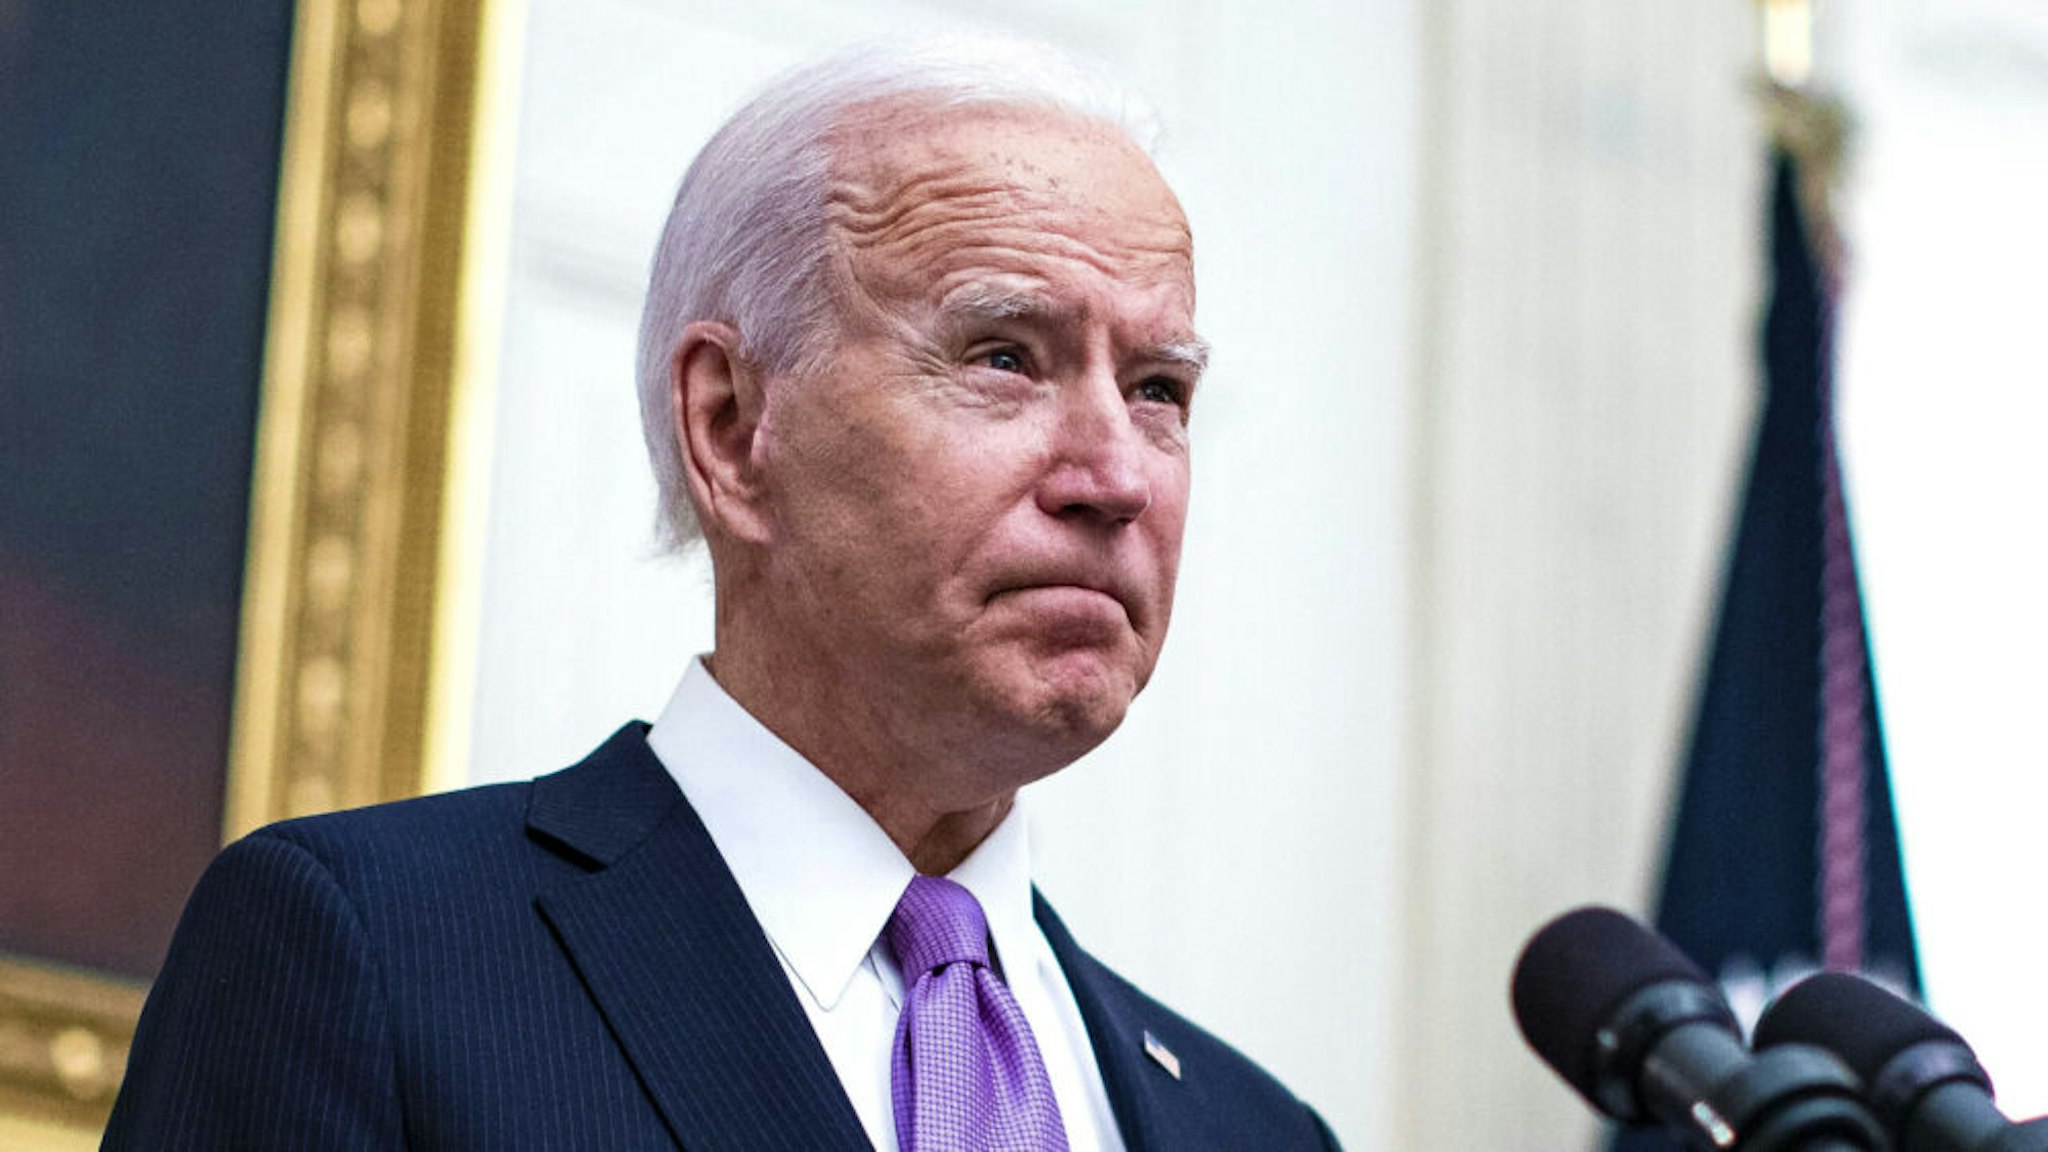 U.S. President Joe Biden pauses while speaking on his administrations Covid-19 response in the State Dining Room of the White House in Washington, D.C., U.S., on Thursday, Jan. 21, 2021. Biden in his first full day in office plans to issue a sweeping set of executive orders to tackle the raging Covid-19 pandemic that will rapidly reverse or refashion many of his predecessor's most heavily criticized policies.